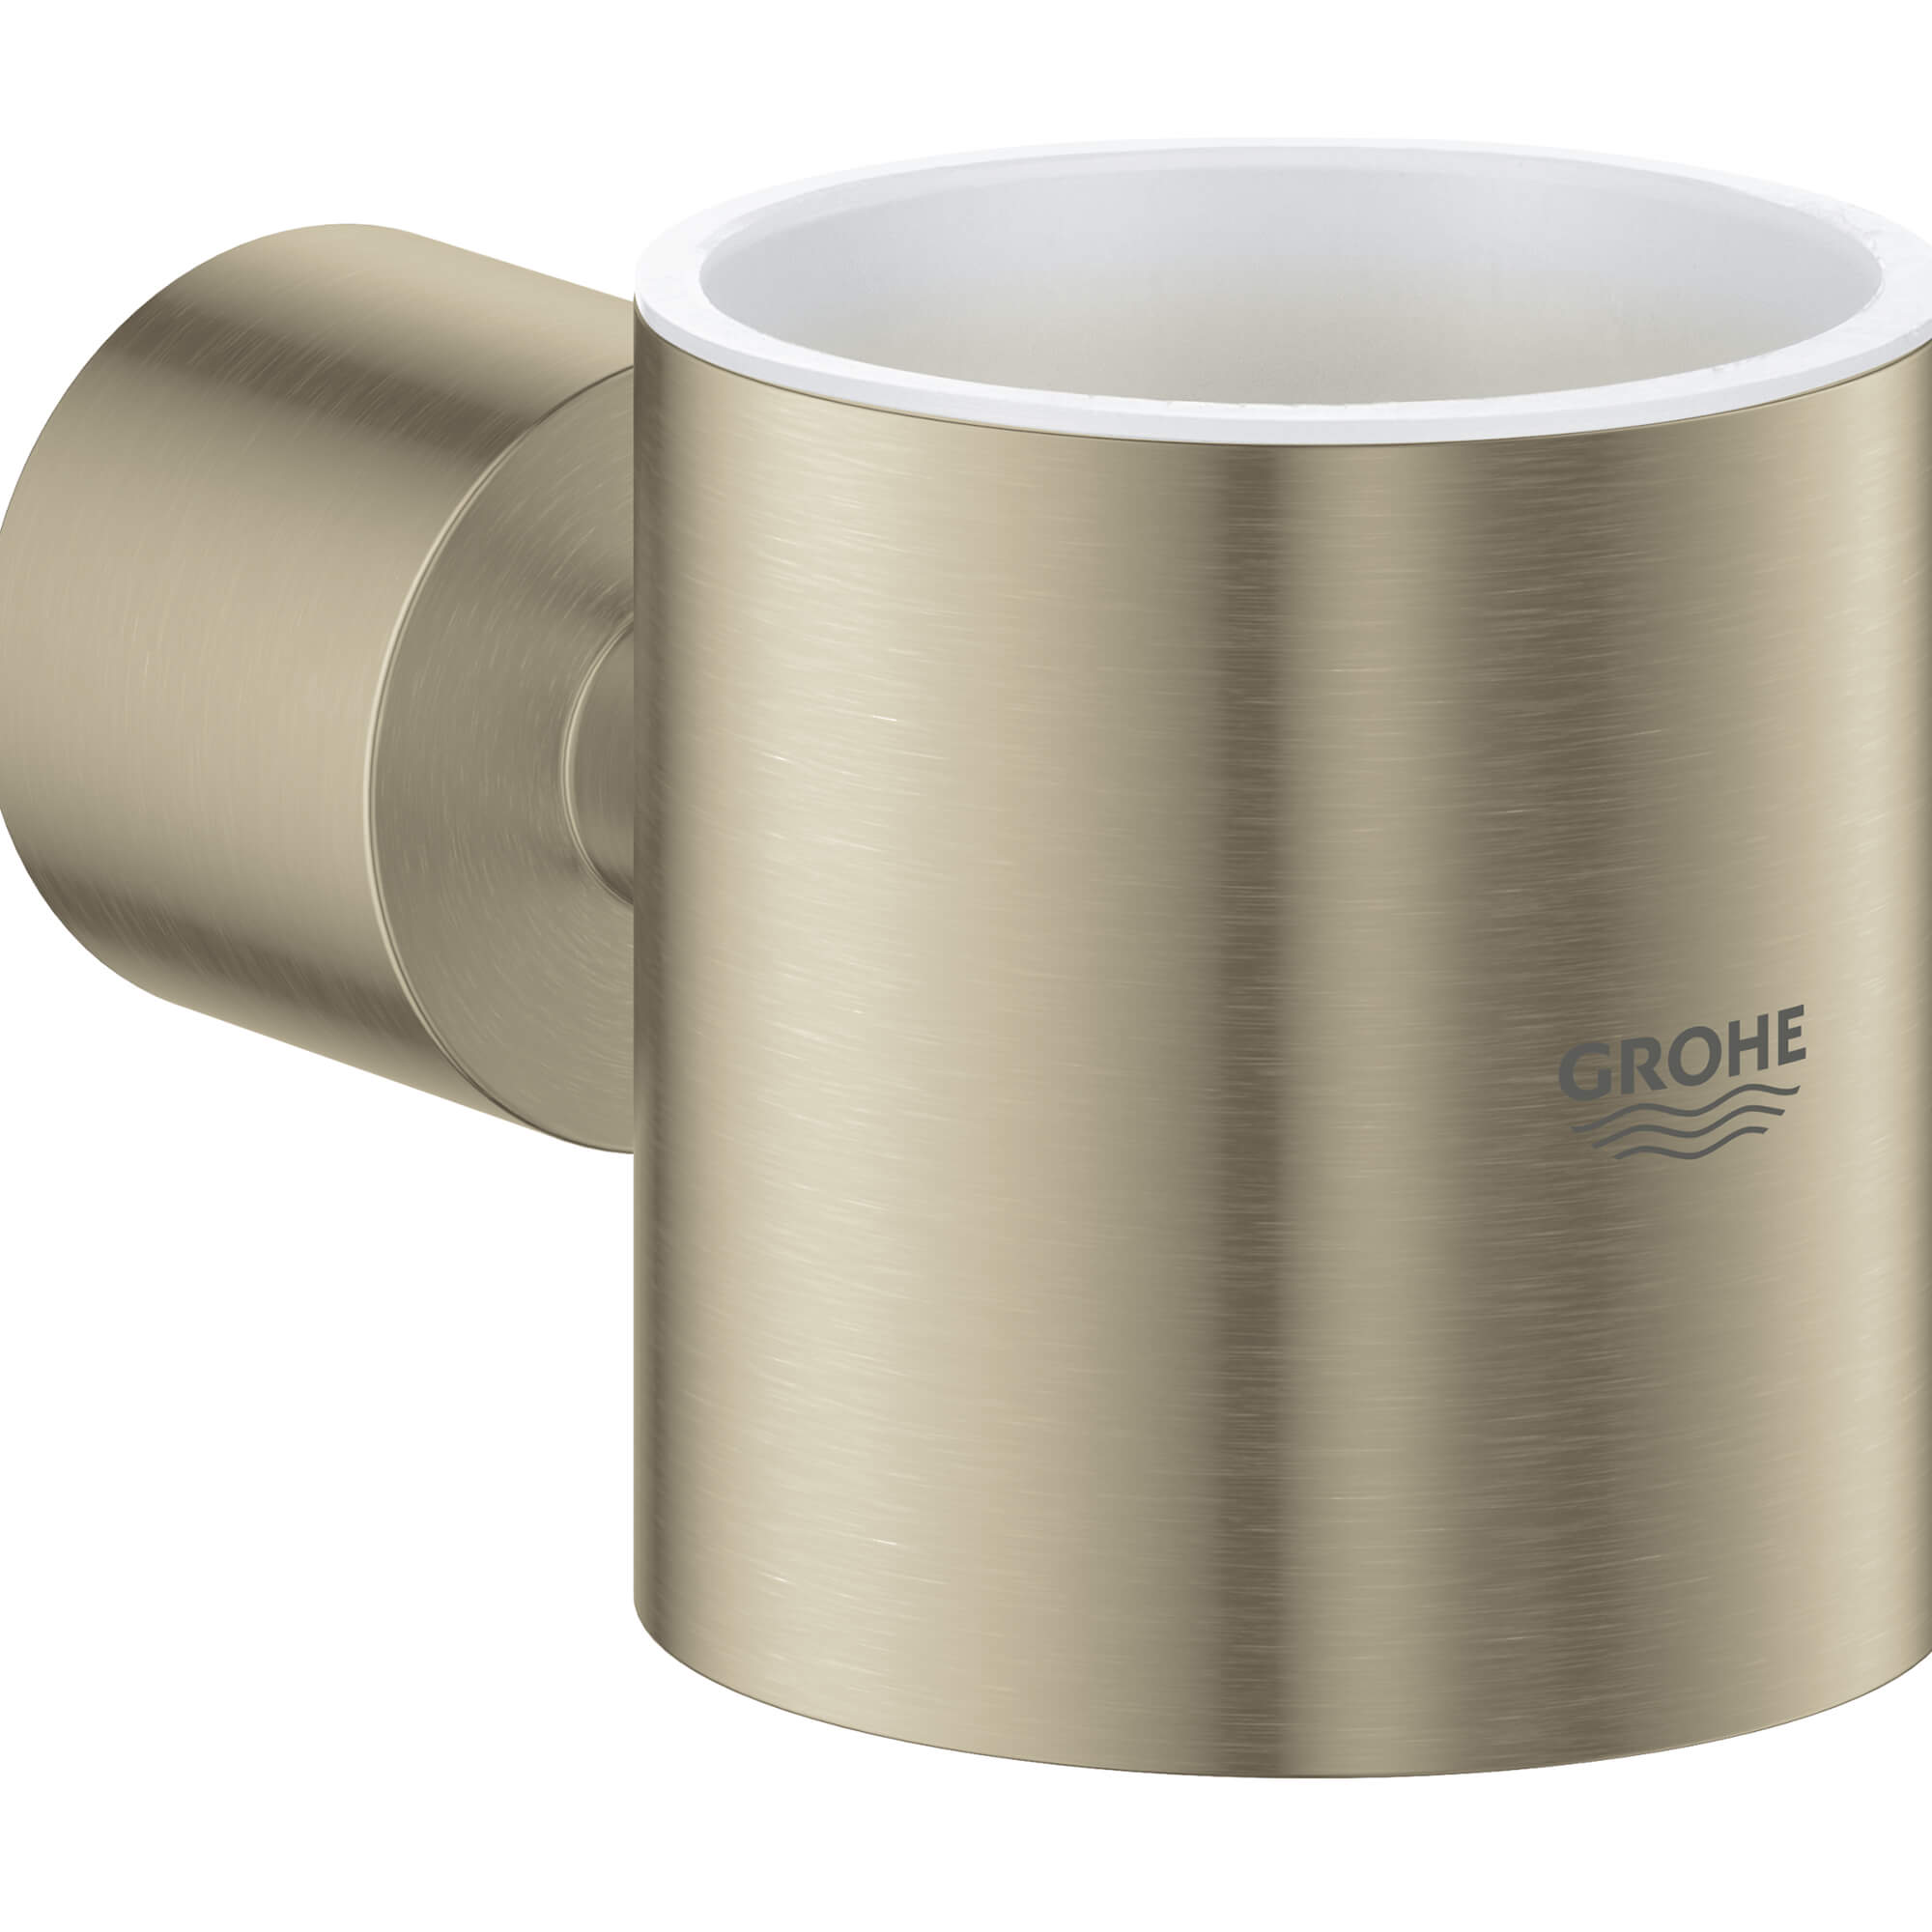 Support pour gobelet GROHE BRUSHED NICKEL